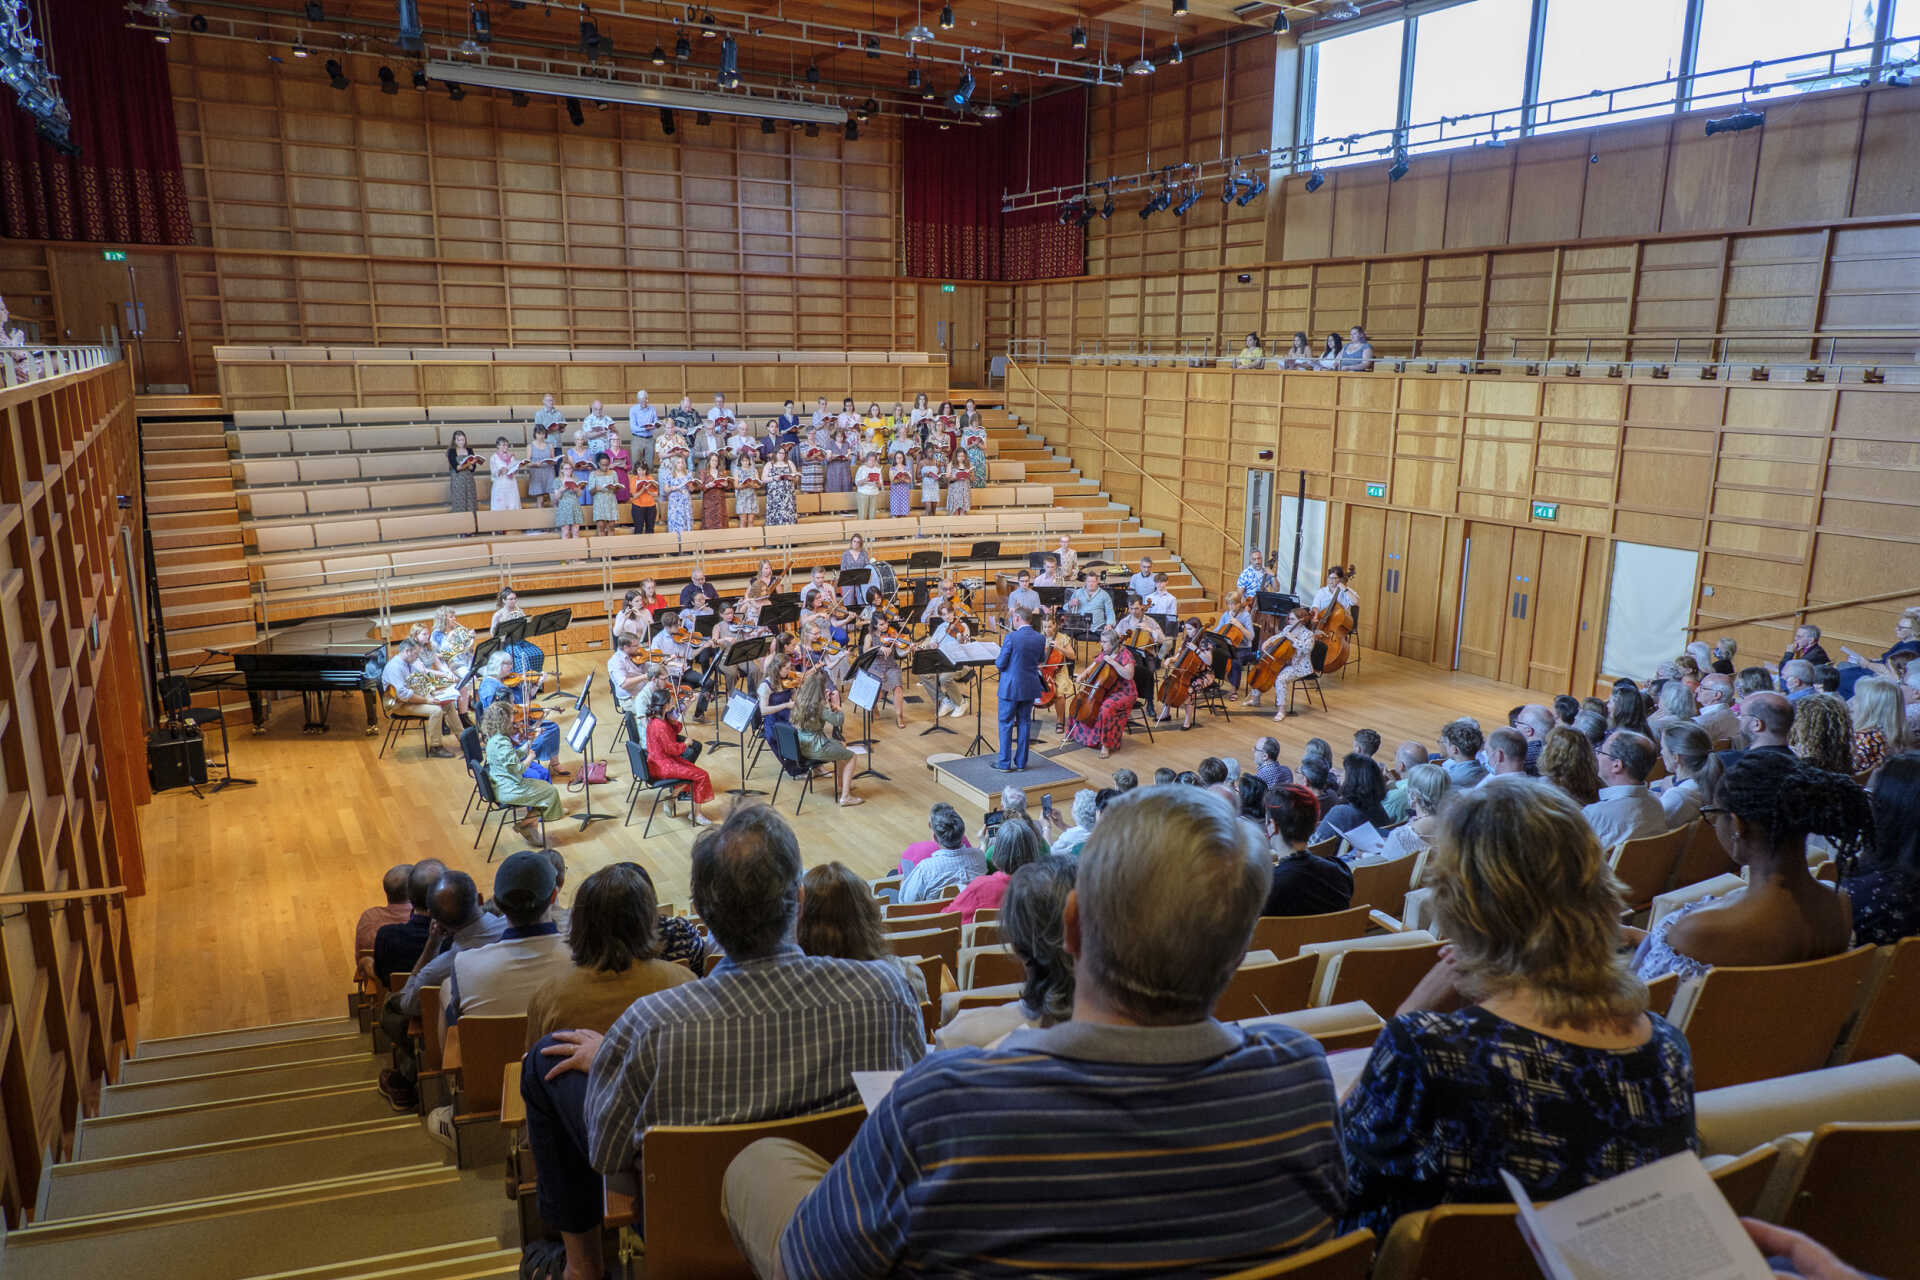 Orchestra and choir performing in a brightly-lit concert hall on a summer day